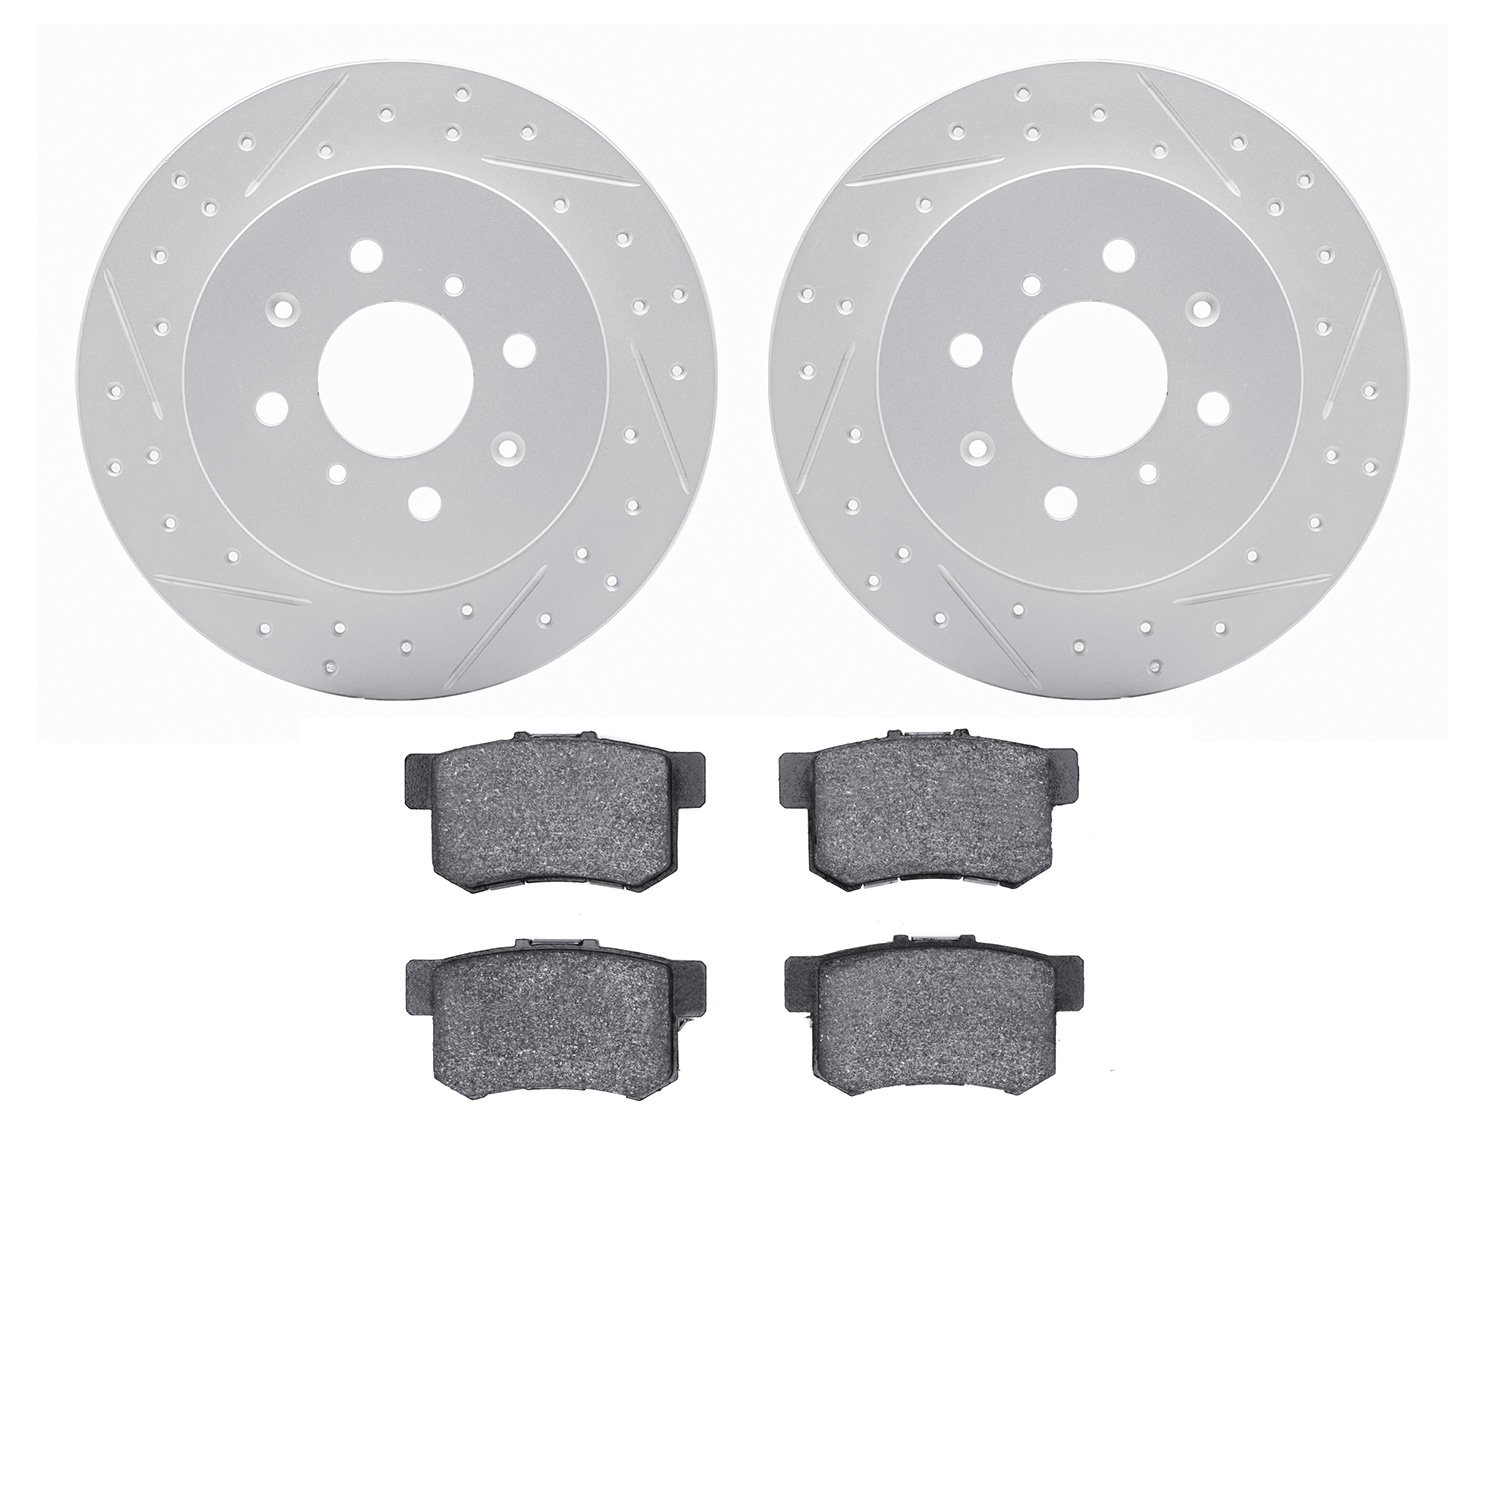 2502-59030 Geoperformance Drilled/Slotted Rotors w/5000 Advanced Brake Pads Kit, 2001-2005 Acura/Honda, Position: Rear